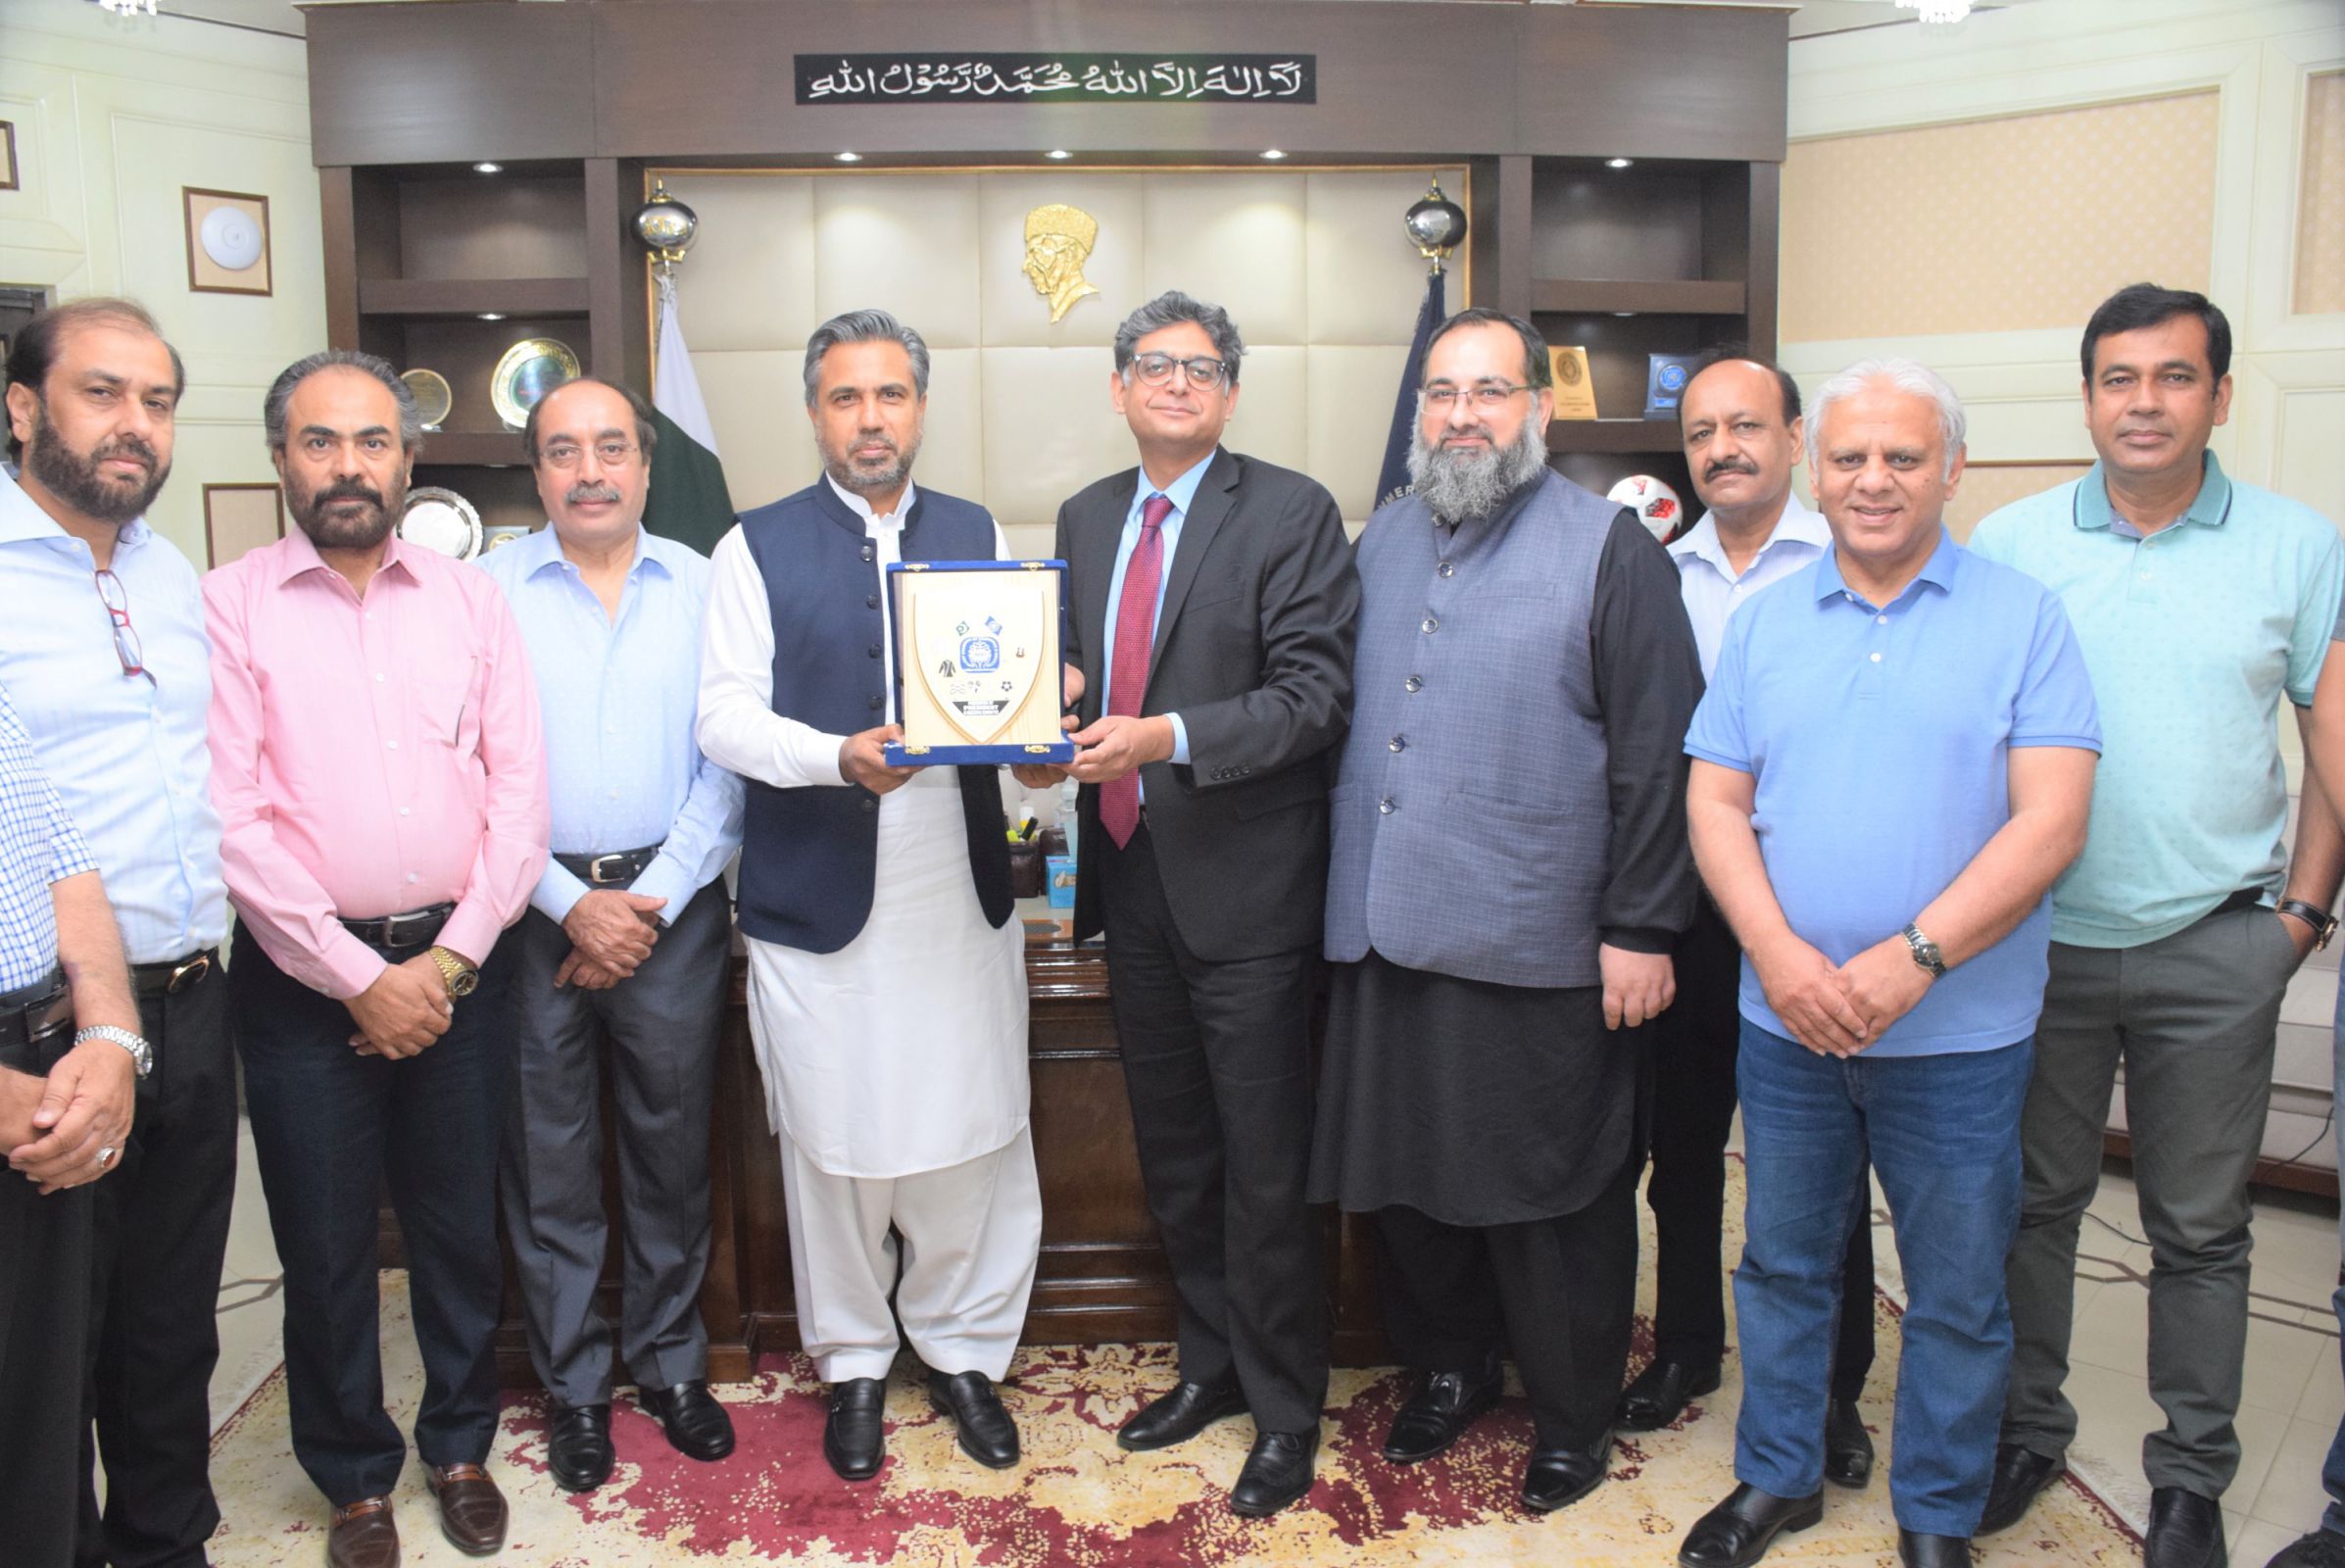 On July 03, 2021, H.E. Mr. Suljuk Mustansar Tarar, Ambassador of Pakistan designated to Netherlands honored a visit to Sialkot Chamber of Commerce & Industry.  Mr. Qaisar Iqbal Baryar, President along with Mr. Khuram Aslam, Senior Vice President, Mr. Ansar Aziz Puri, Vice President and Executive Committee, SCCI welcomed the Ambassador at SCCI. During the meeting, measures to enhance Bilateral Trade and Exchange of Delegation between both countries was discussed in details.